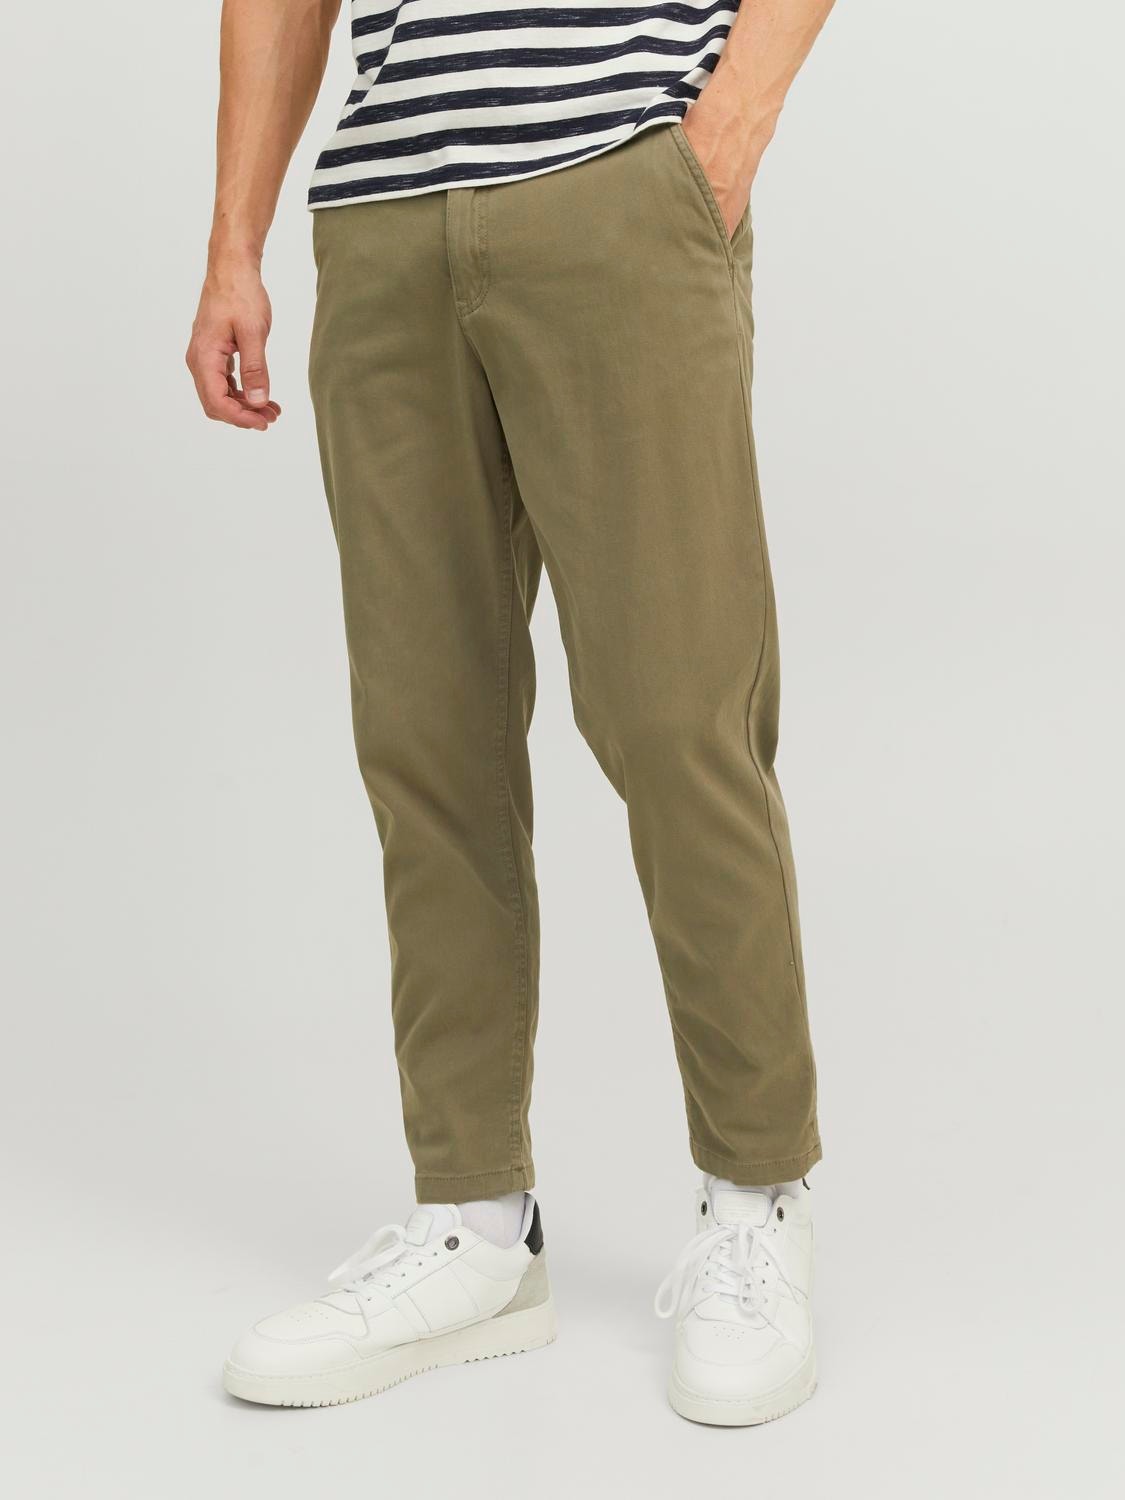 Jack & Jones Tapered Fit Chino trousers -Dusty Olive - 12242188